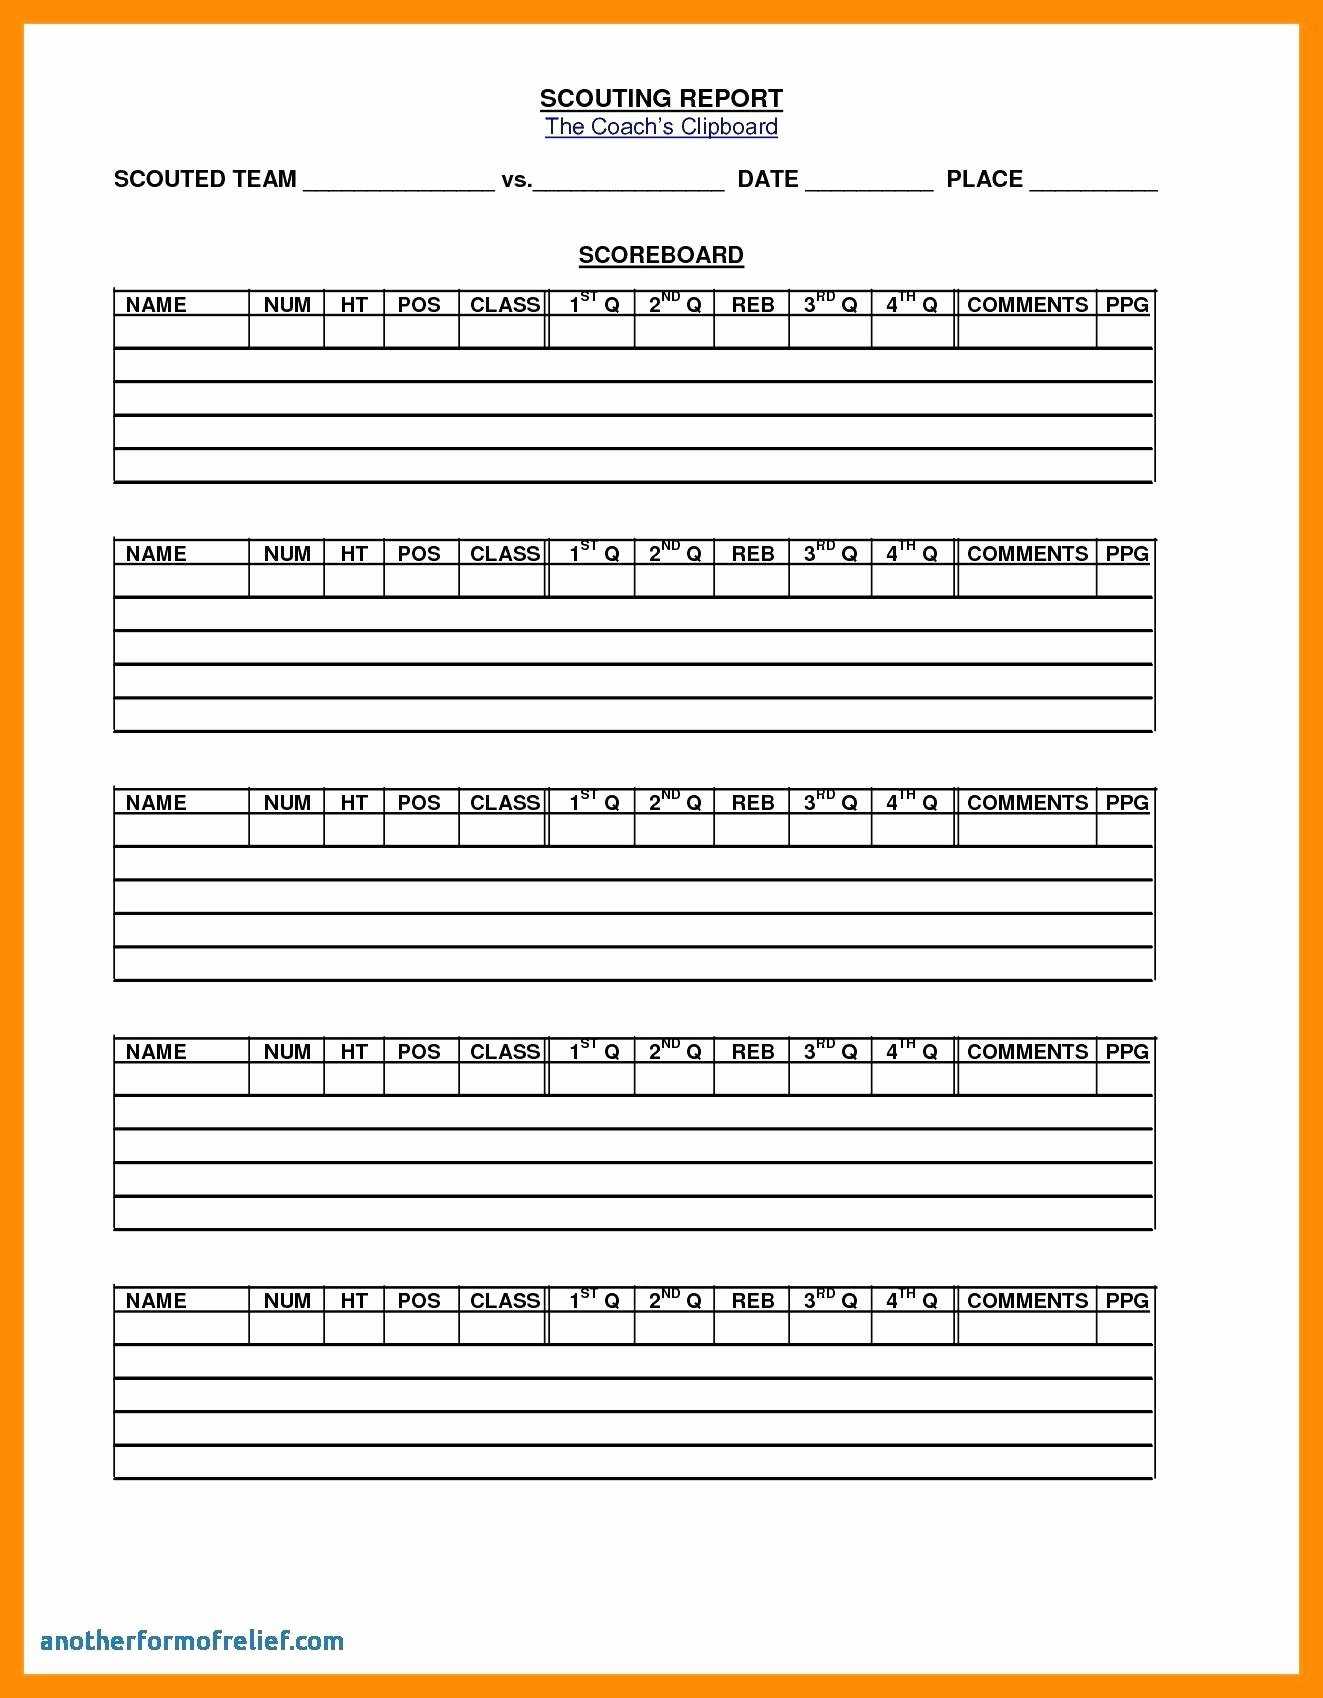 2E6D Basketball Scouting Report Template Sheets With Scouting Report Basketball Template